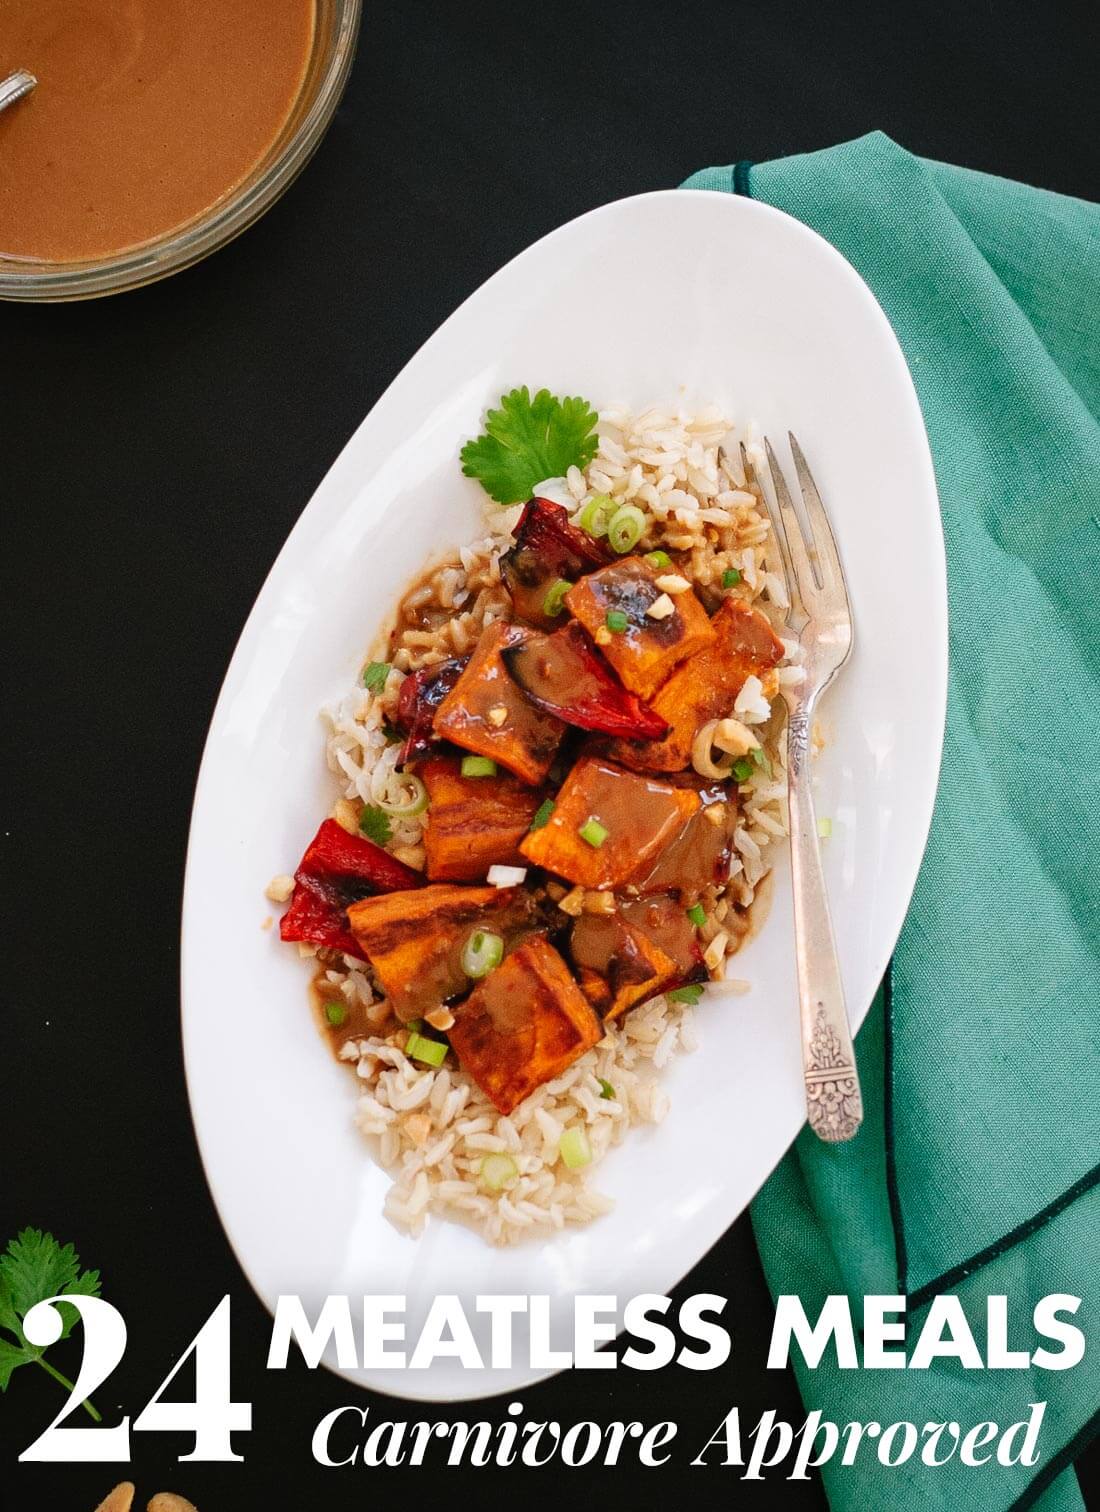 Find 24 vegetarian recipes, all carnivore approved! Meat lovers love these meatless options. cookieandkate.com